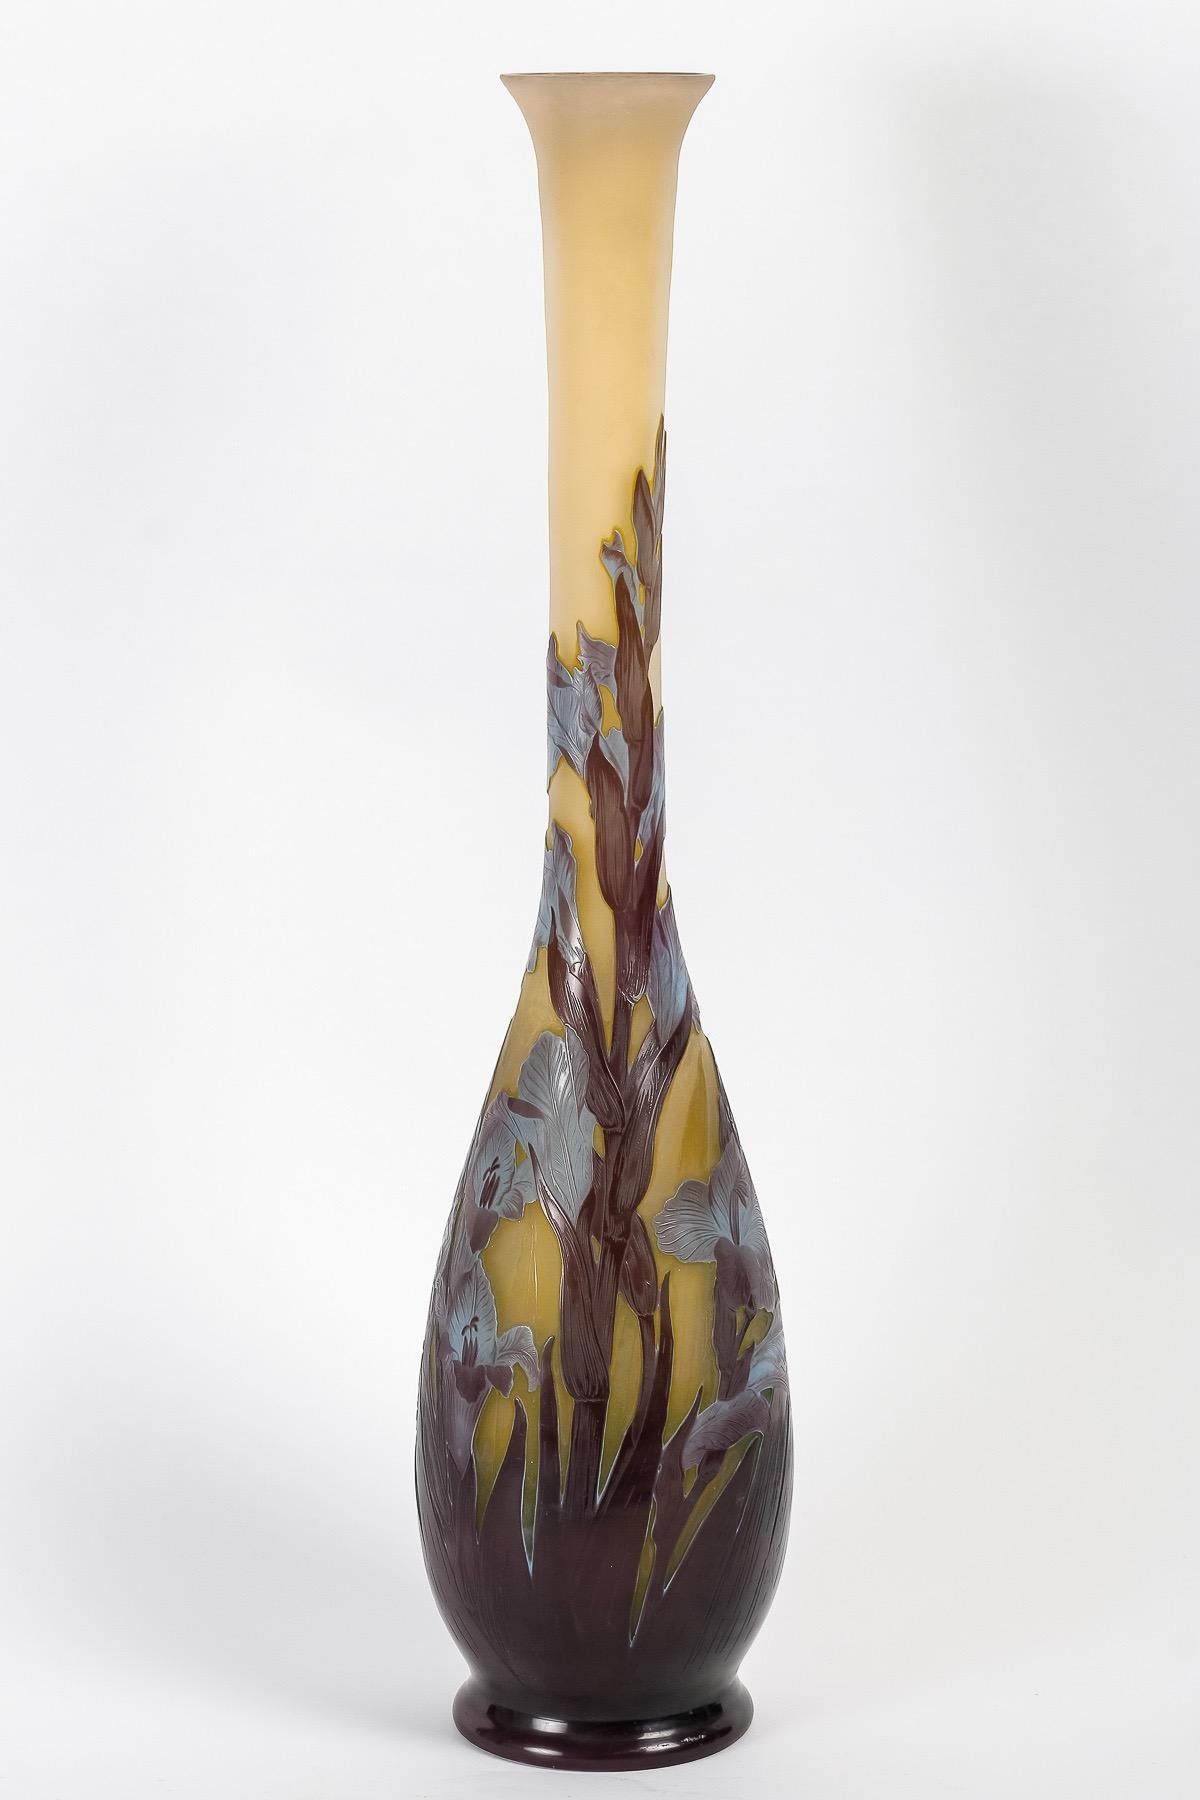 Émile Gallé (1846-1904), Art Nouveau Cameo Glass Vase « Gladioli Flowers »

Large piriform vase on heel with long collar in dark blue and blue multi-layered glass
Cased glass, opalescent, colorless, yellow and blue, acid-etched design of “Gladioli